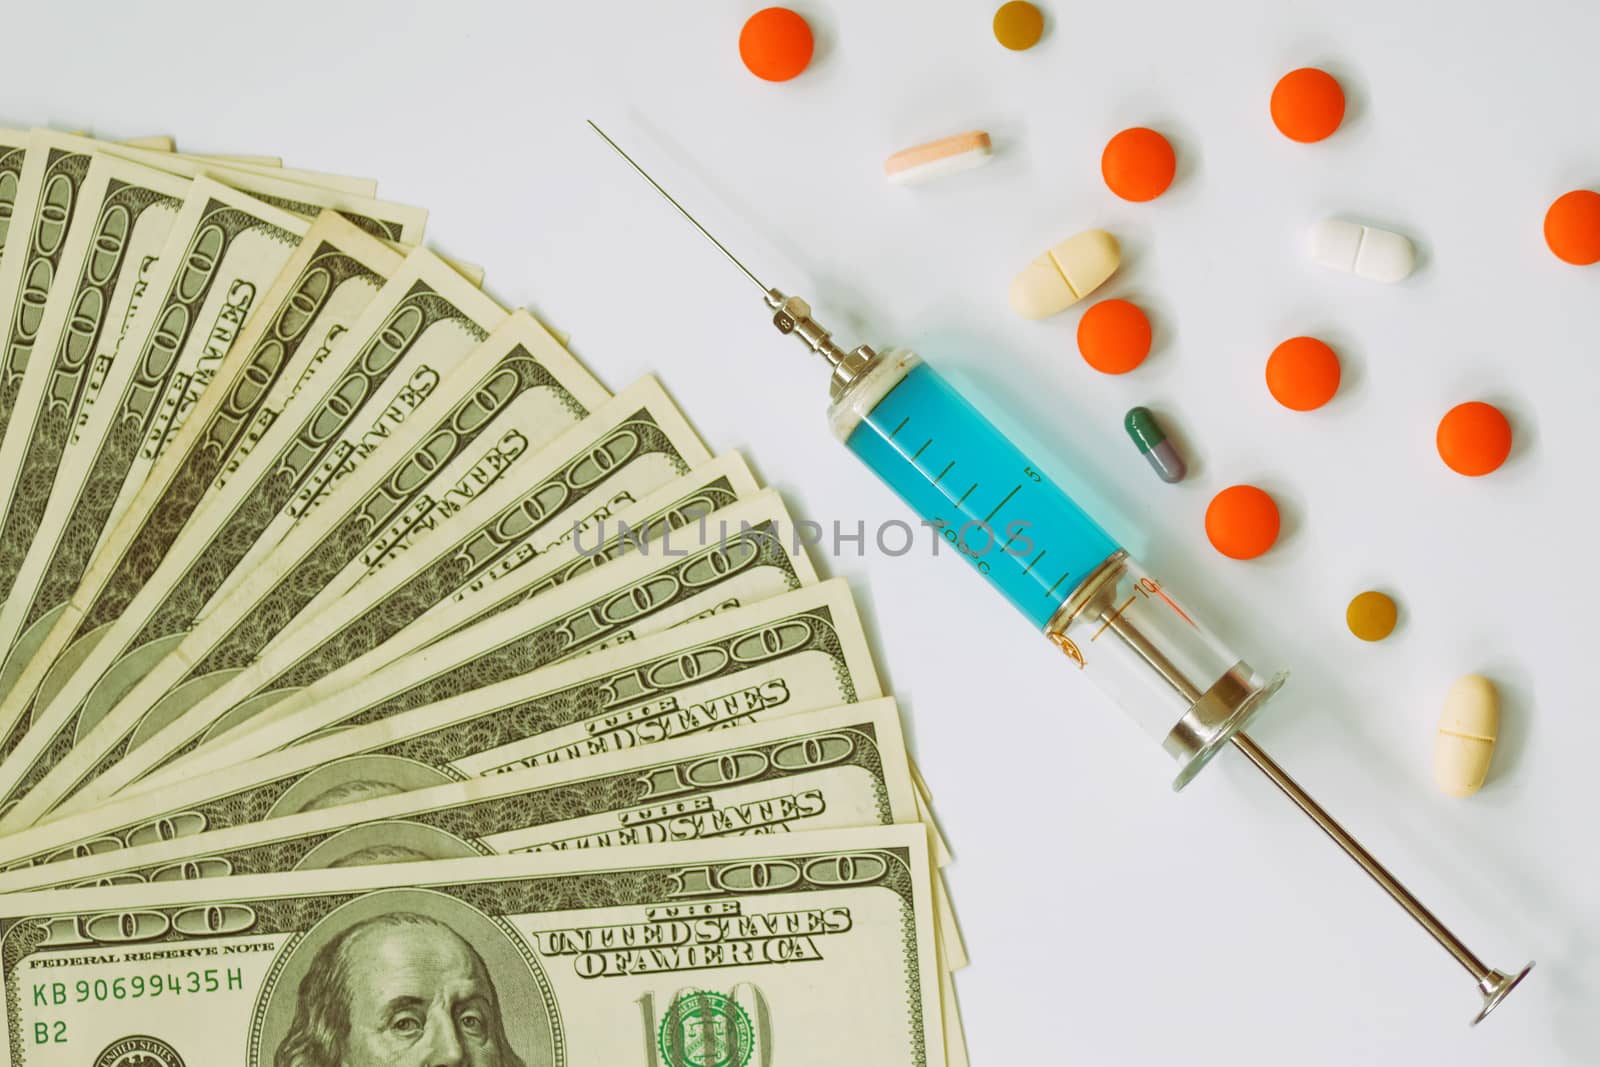 injection needle, pills and banknotes by Bleshka